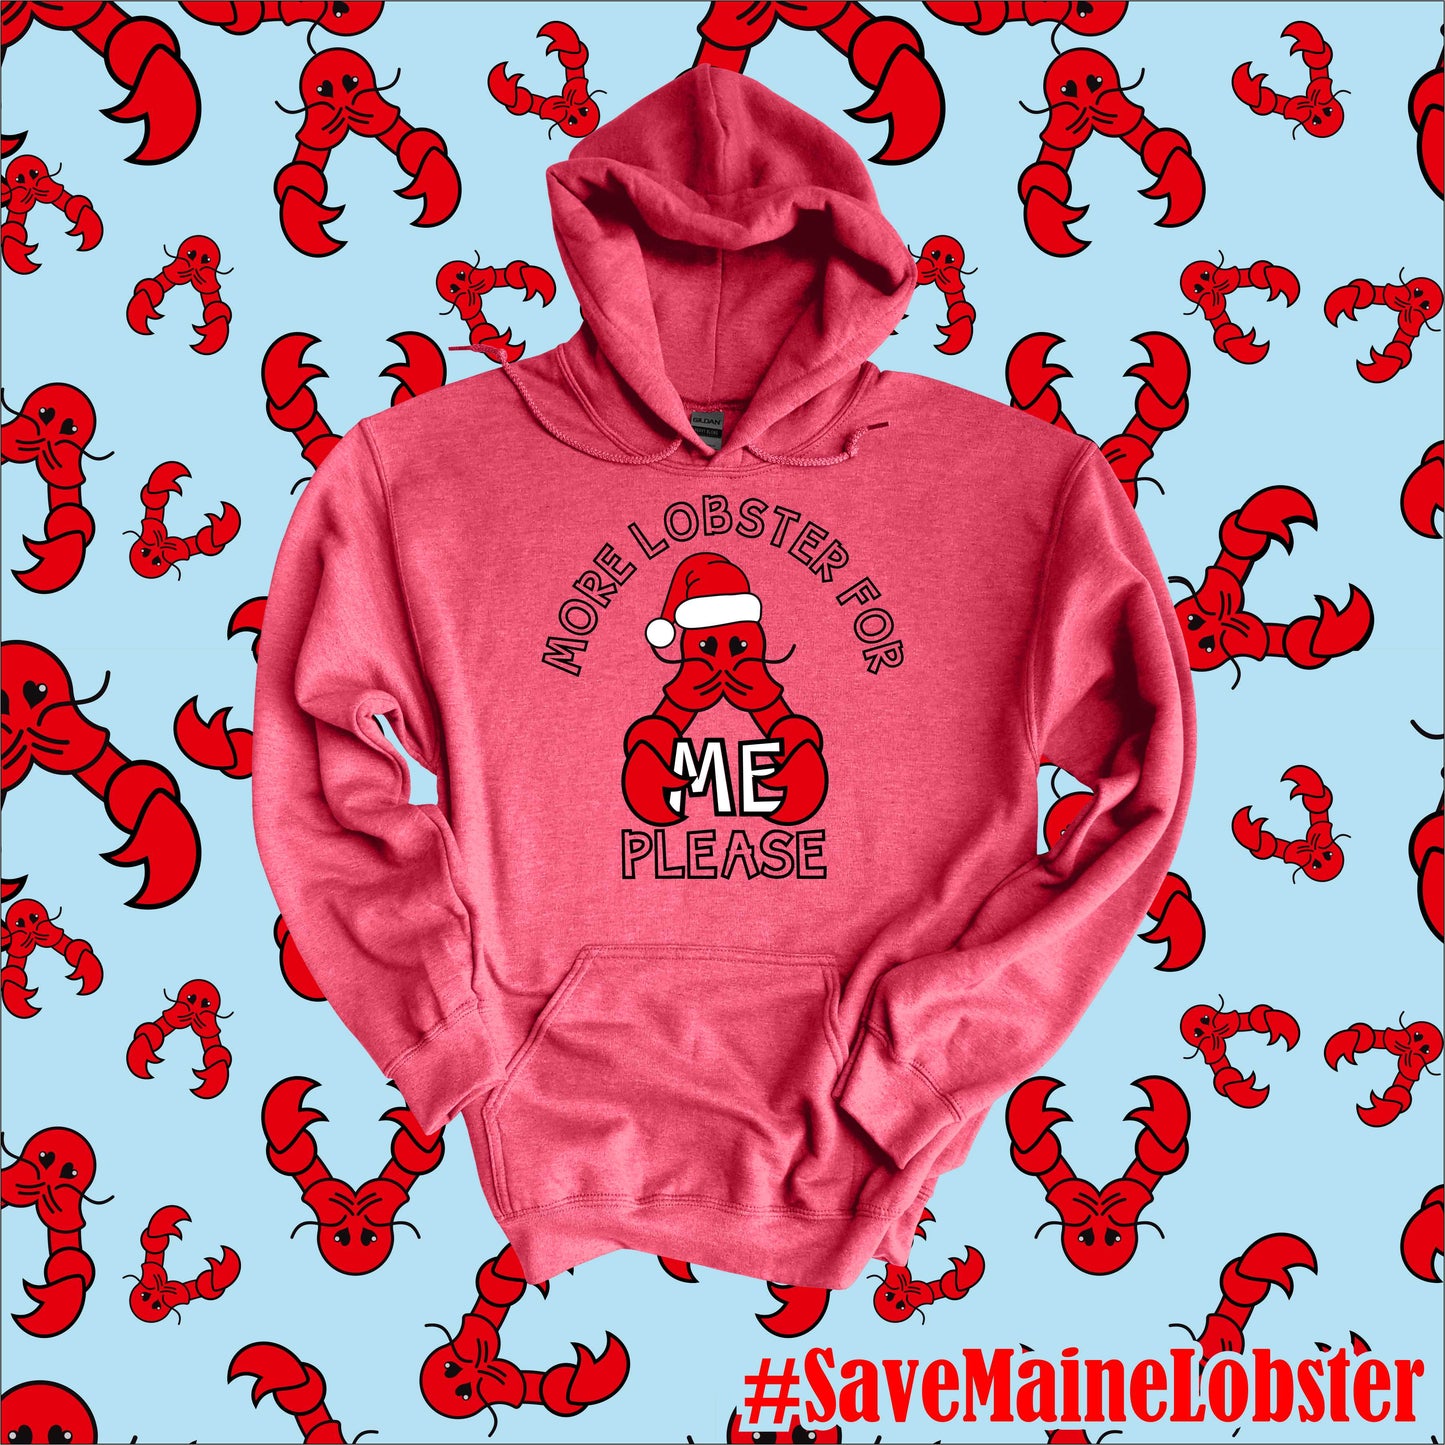 #SaveMaineLobstermen Holiday Apparel (Red) by IRISisBEAUTY and Shenanigans By Sam